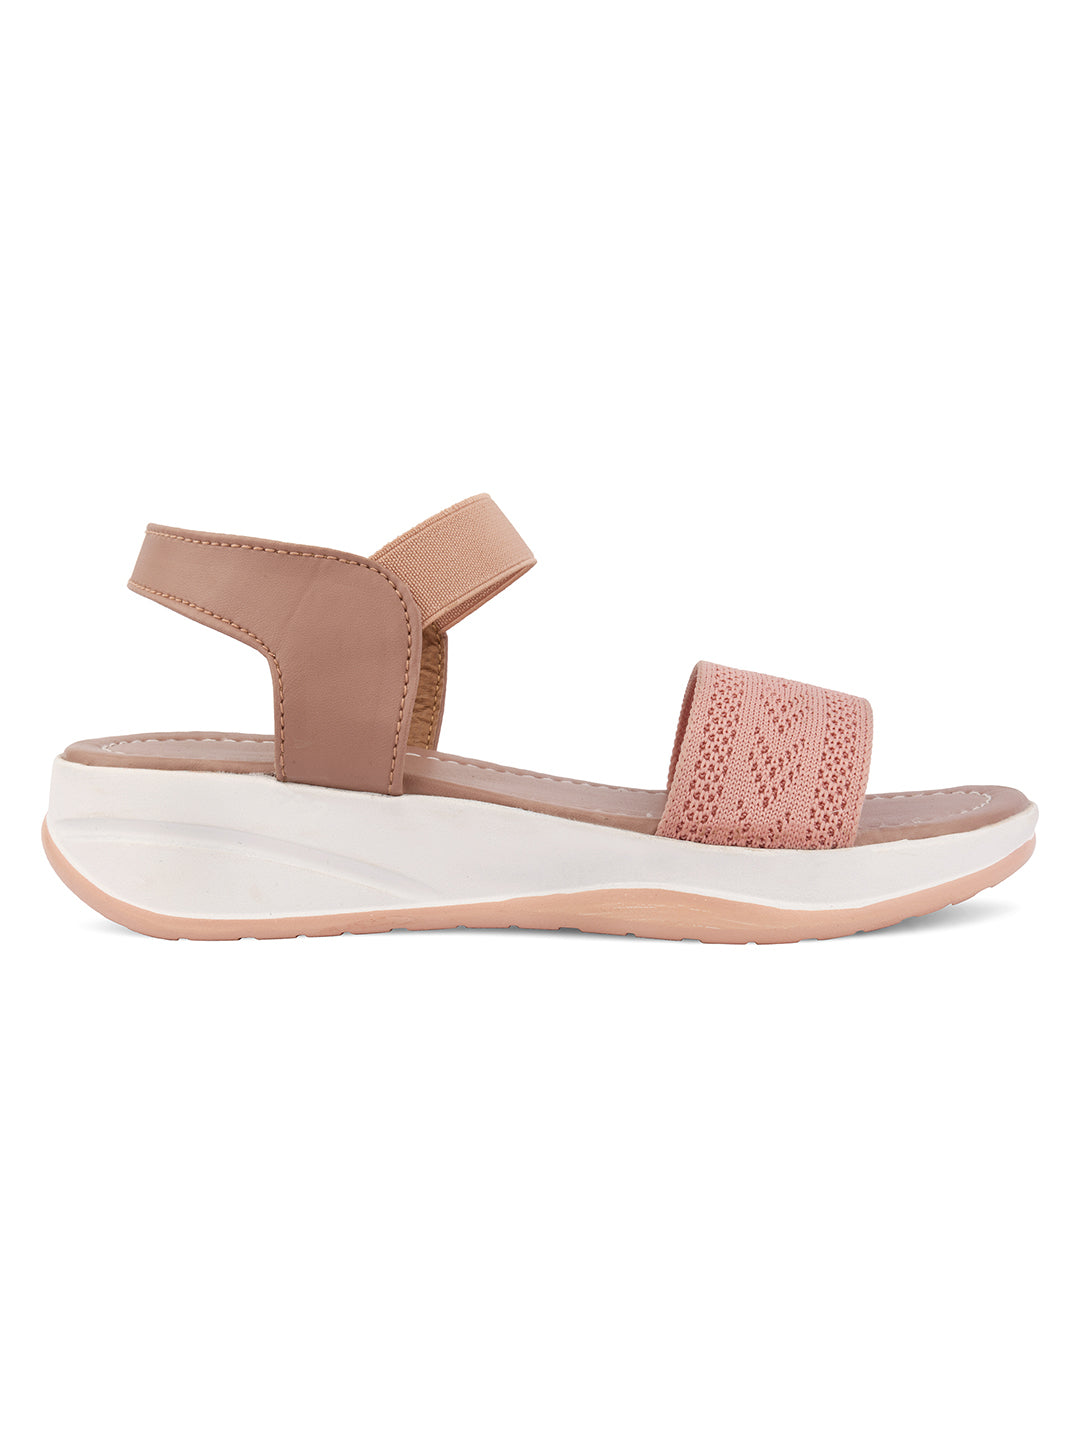 DESI COLOUR Women Peach Printed Comfort Sandals with Laser Cuts